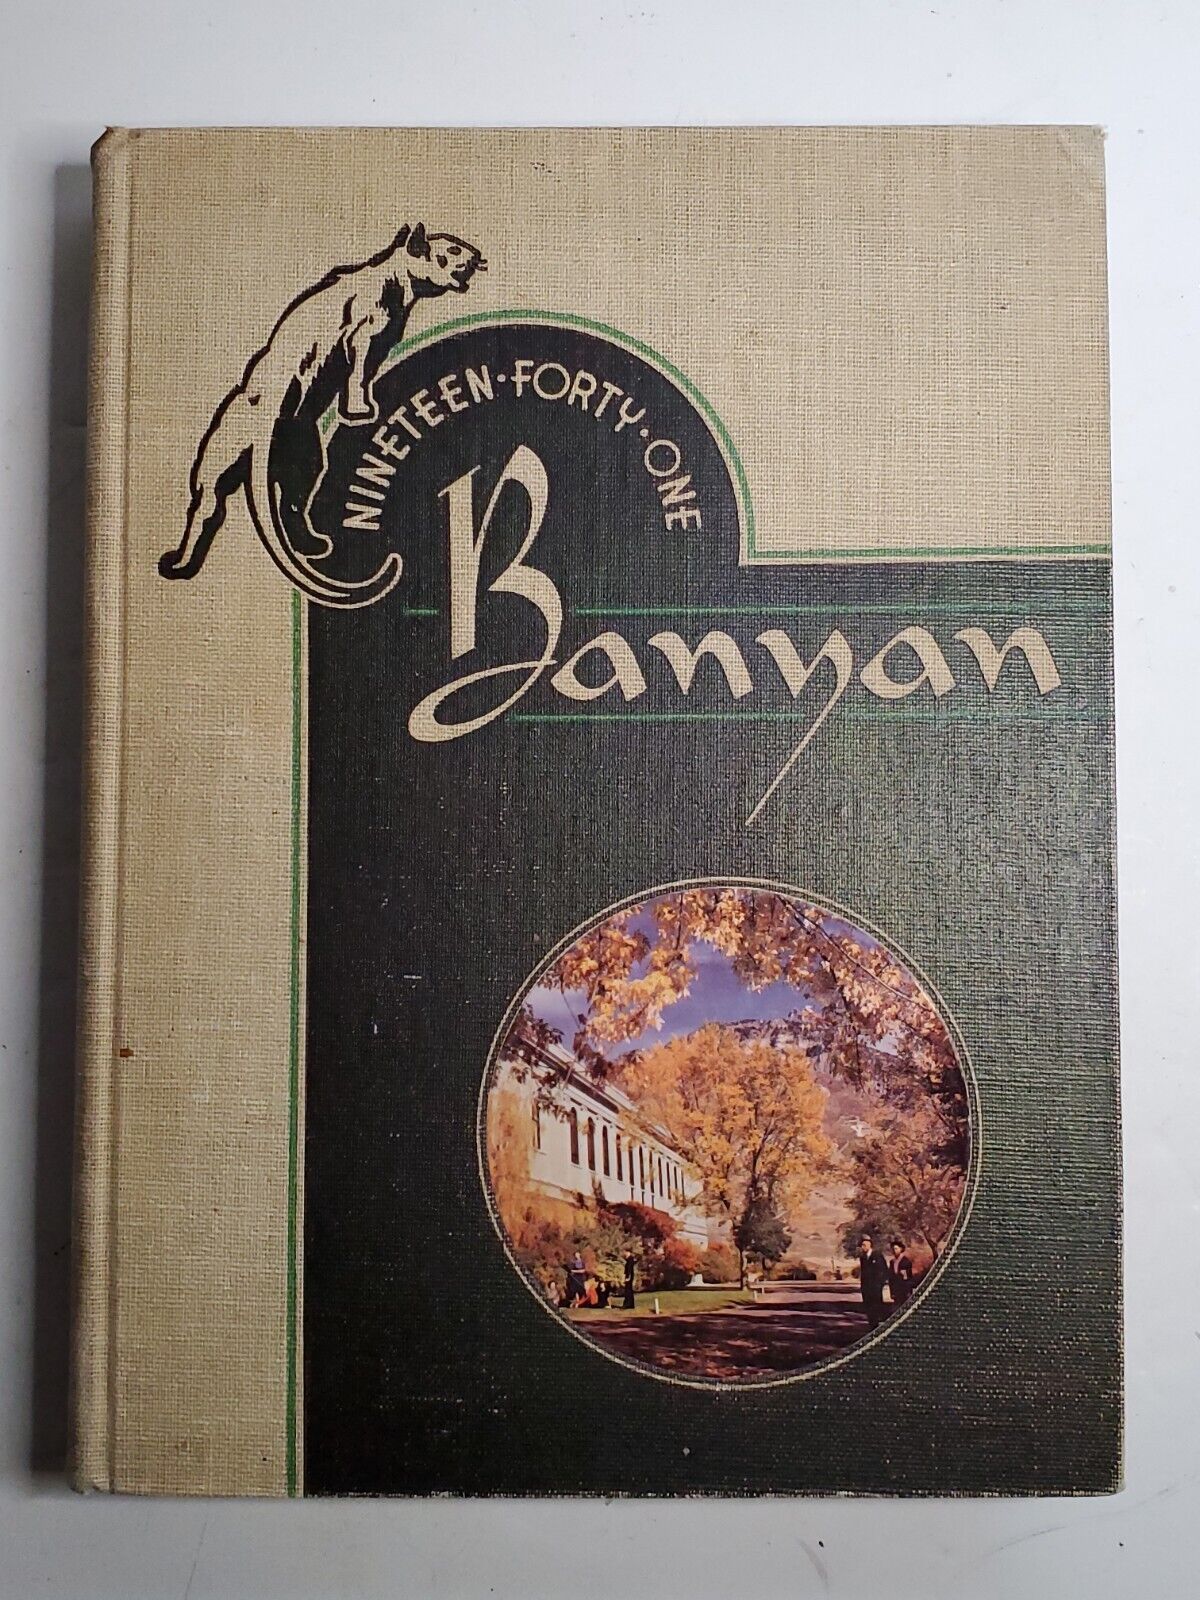 1941 Banyan - Brigham Young University Yearbook - Great Condition